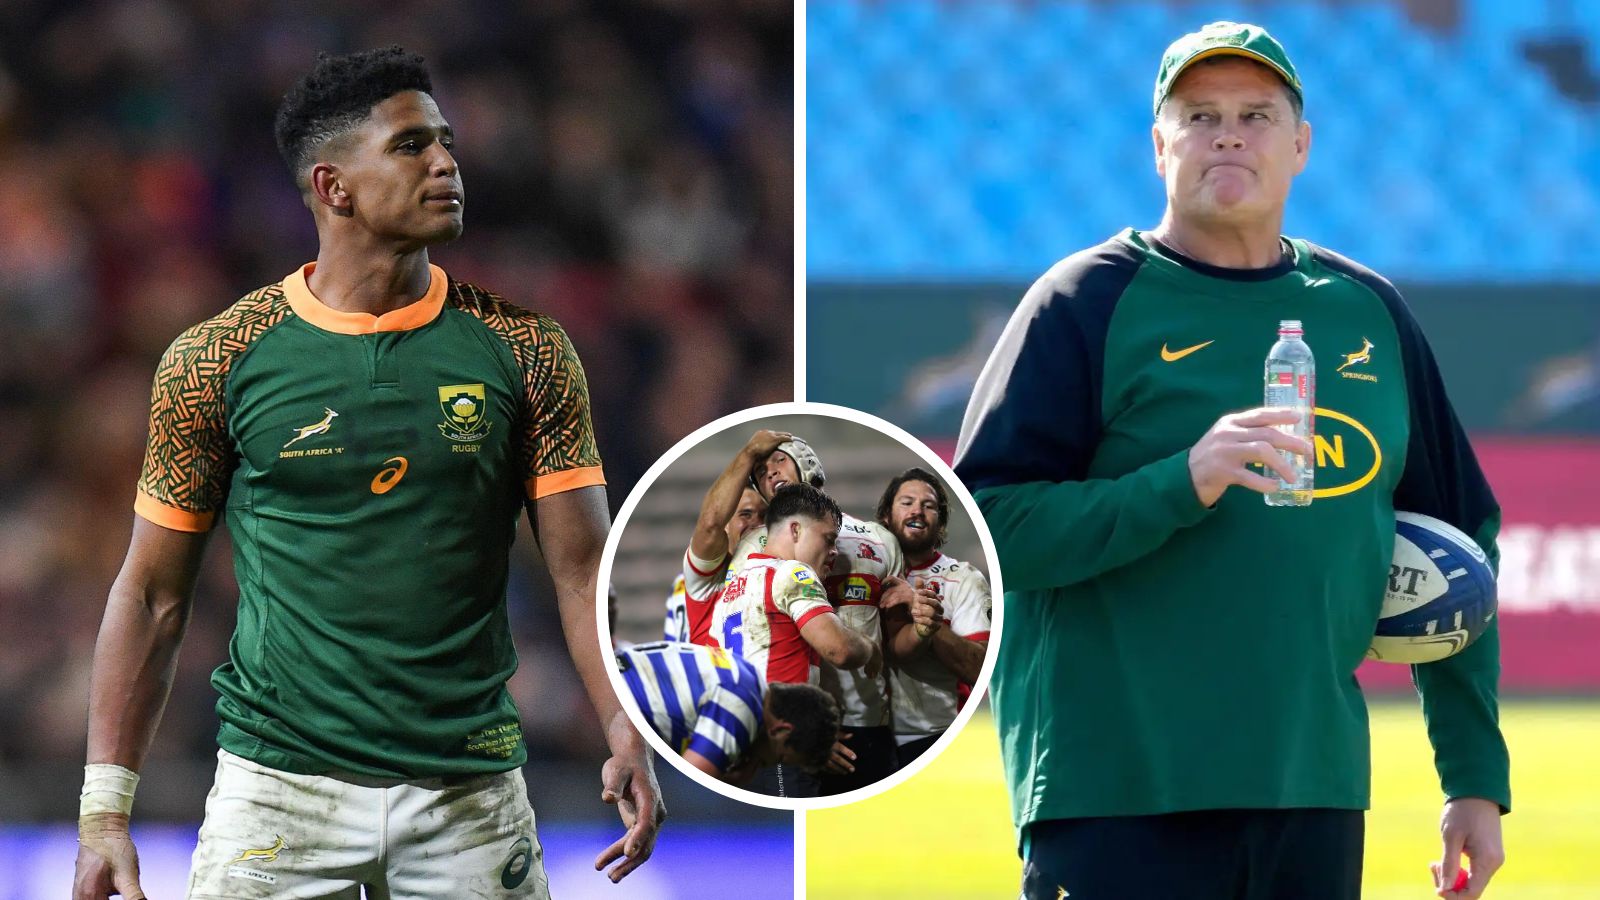 springboks: eight takeaways from rassie erasmus’ alignment camp squad as the world cup winners embrace youth